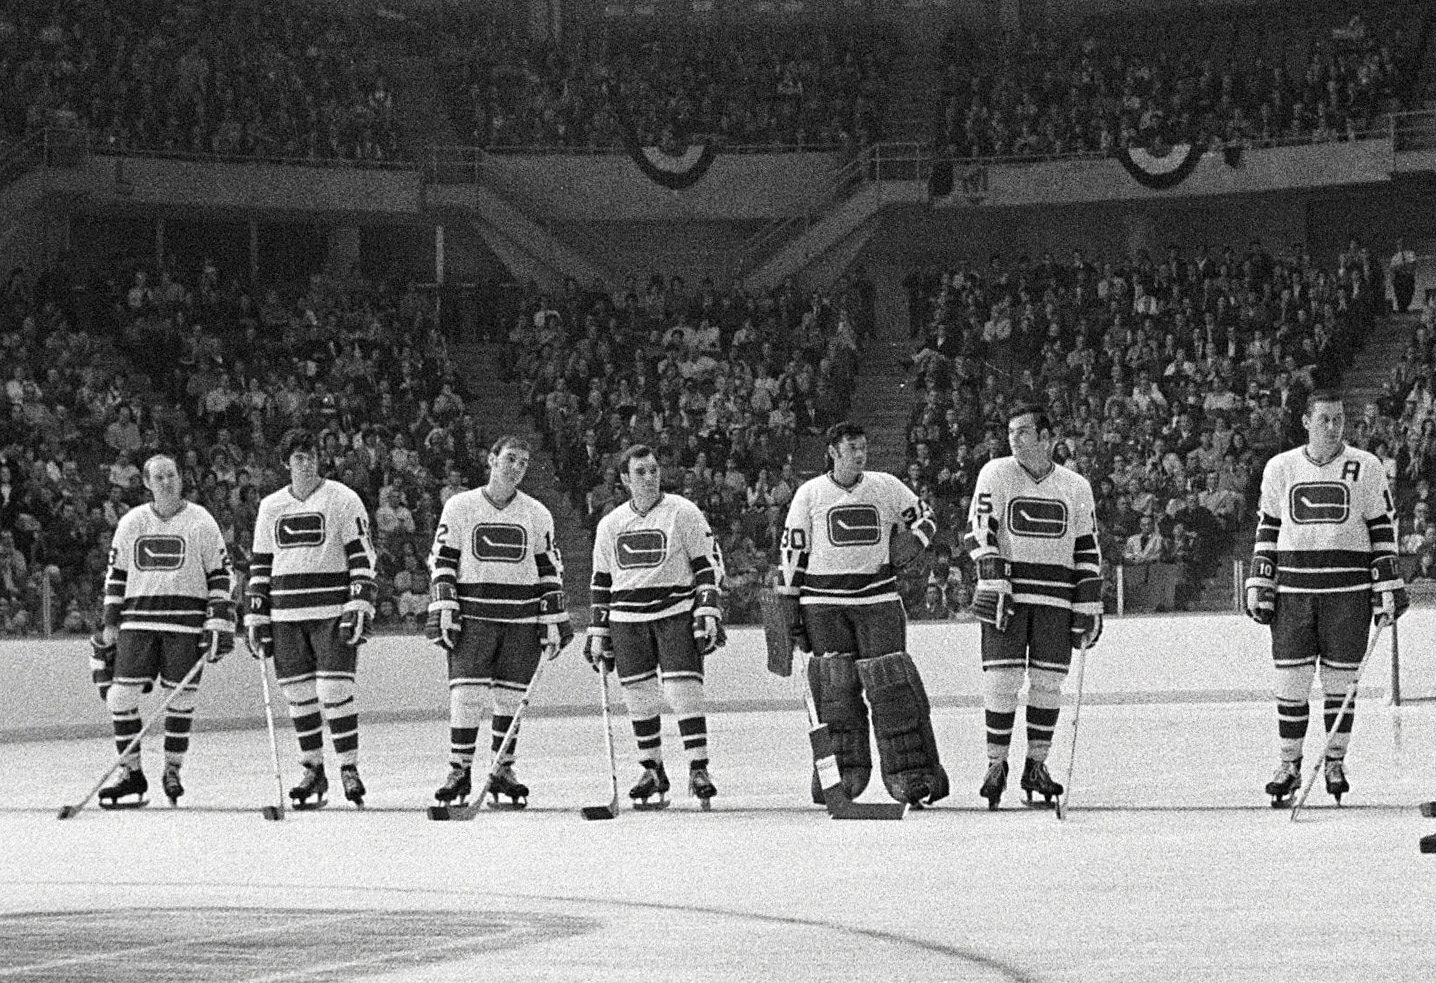 The 1969-70 Vancouver Canucks of the Western Hockey League, the